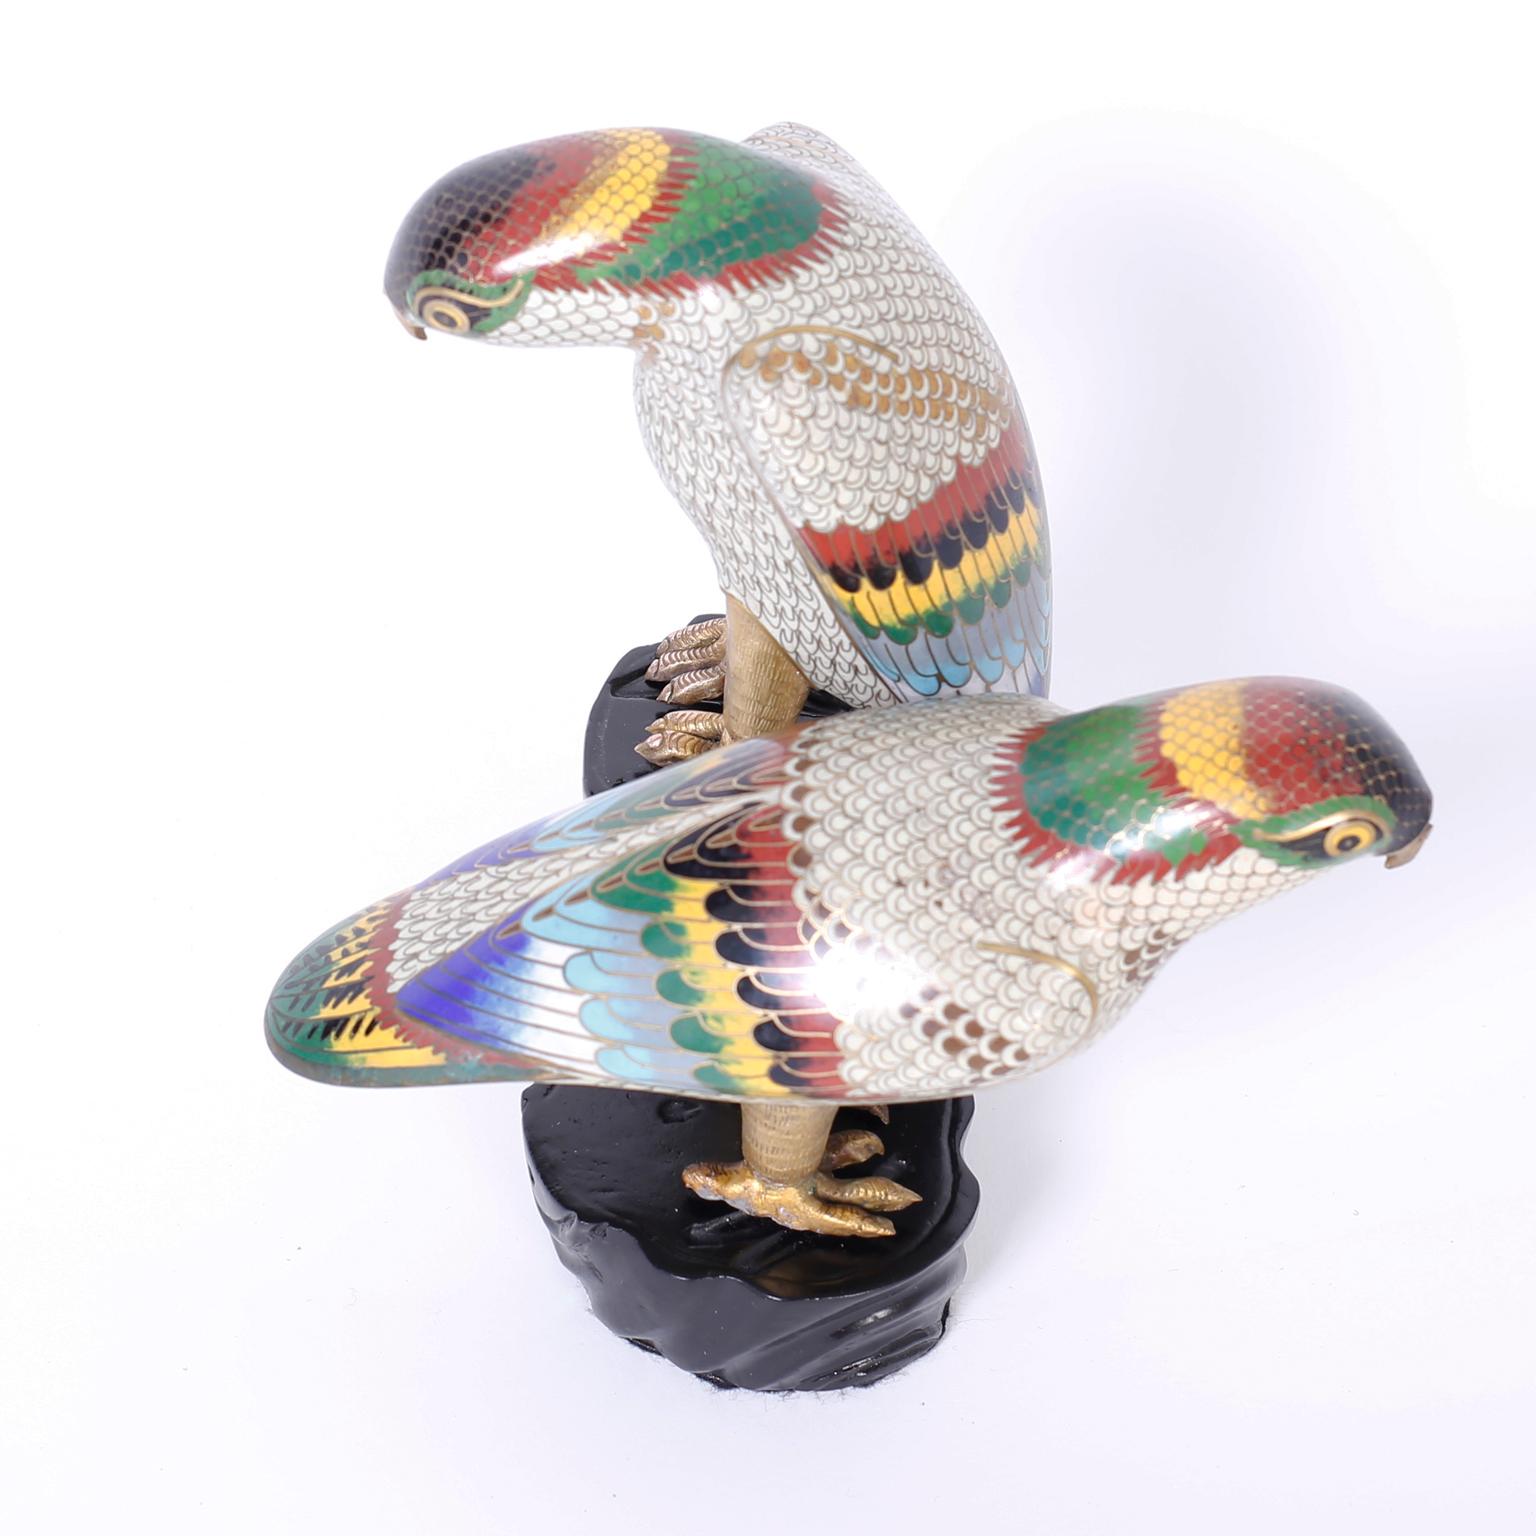 Refined pair of Chinese cloisonné parrots with colorful plumage, quizzical expressions and uniquely perched on a carved wood faux tree trunk.